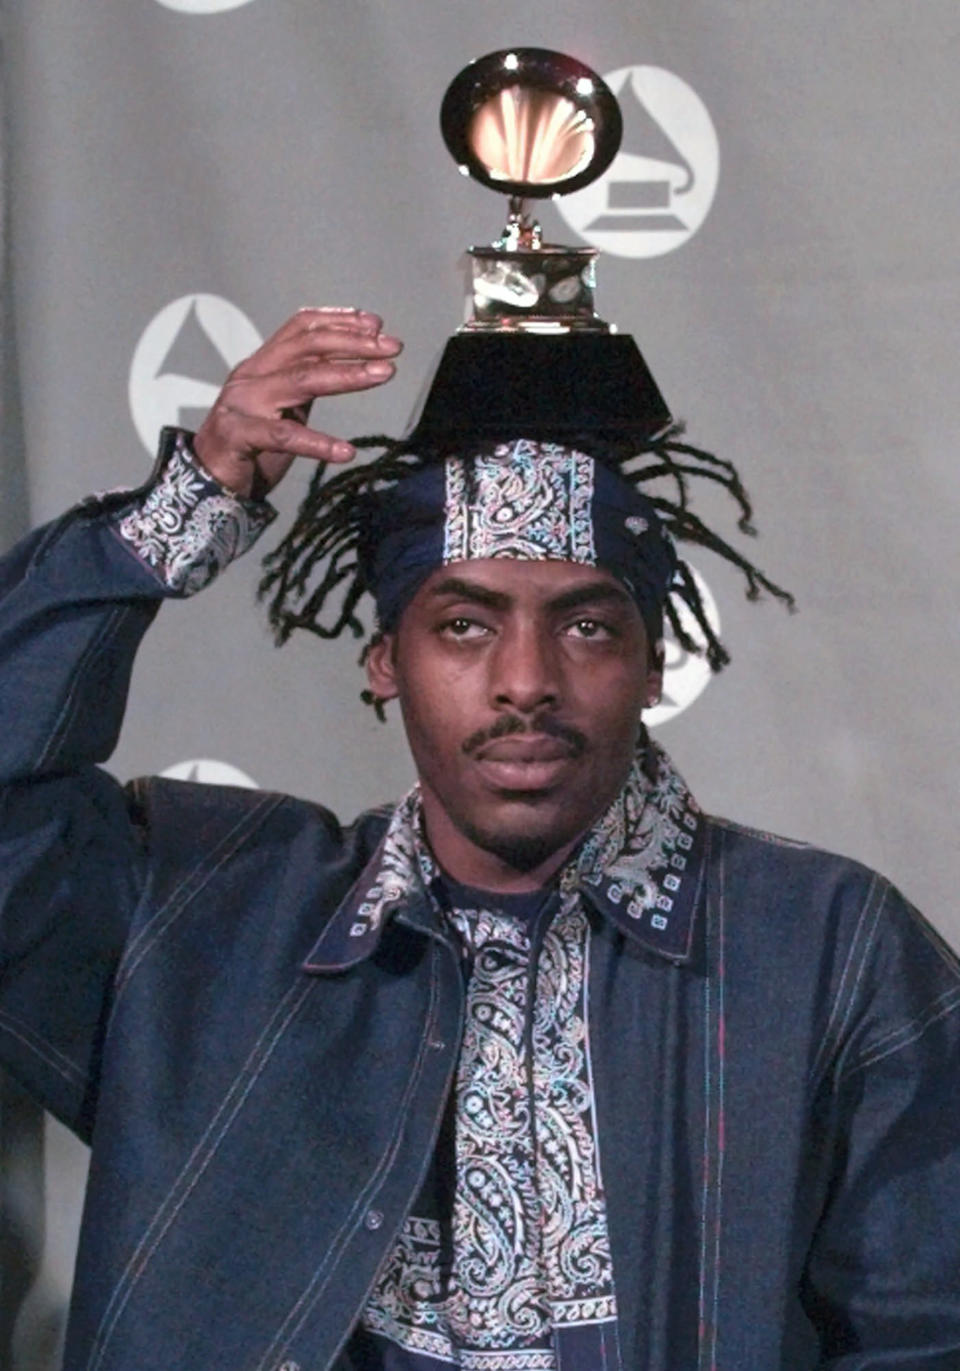 FILE - Coolio balances the Grammy he won for Best Rap Solo Performance at the 38th annual Grammy Awards at the Shrine Auditorium in Los Angeles, Wednesday, Feb. 28, 1996. Coolio, the rapper who was among hip-hop&#x002019;s biggest names of the 1990s with hits including &#x00201c;Gangsta&#x002019;s Paradise&#x00201d; and &#x00201c;Fantastic Voyage,&#x00201d; has died. Manager Jarez Posey tells The Associated Press that Coolio, whose legal name was Artis Leon Ivey Jr., died at the Los Angeles home of a friend on Wednesday, Sept. 28, 2022. He was 59. (AP Photo/Reed Saxon, File)